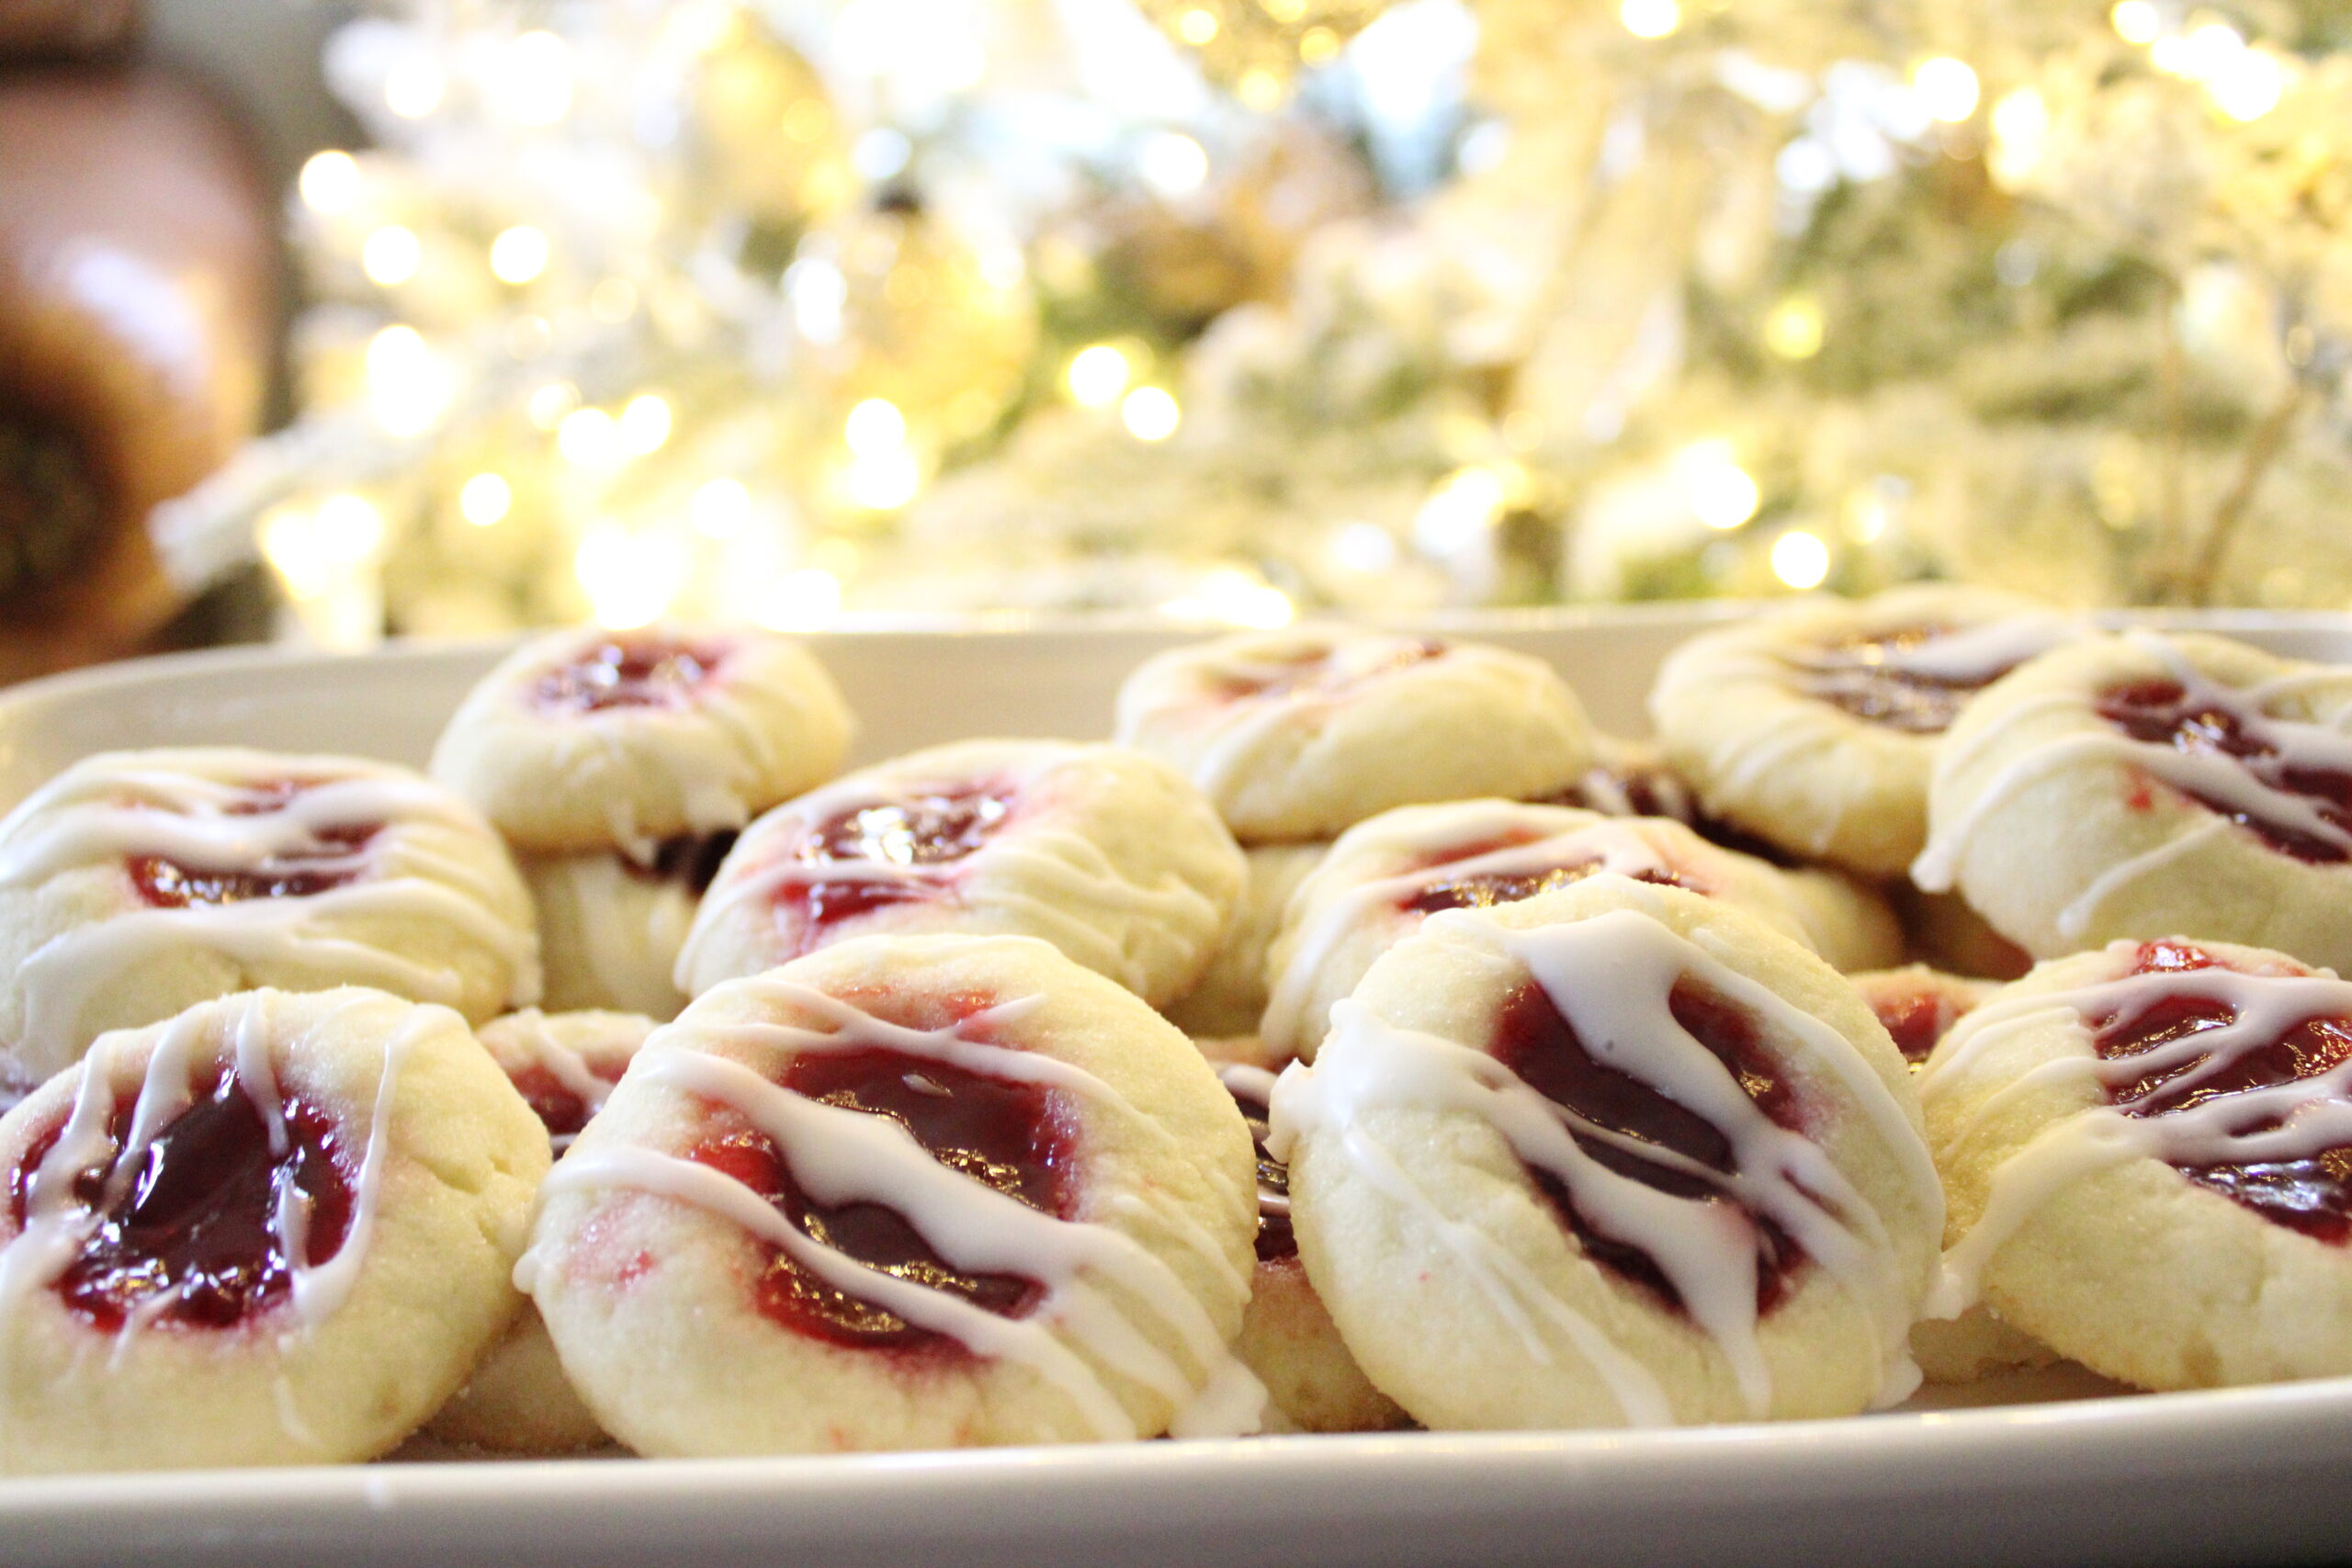 Wide View of Raspberry Thumbprint Cookies